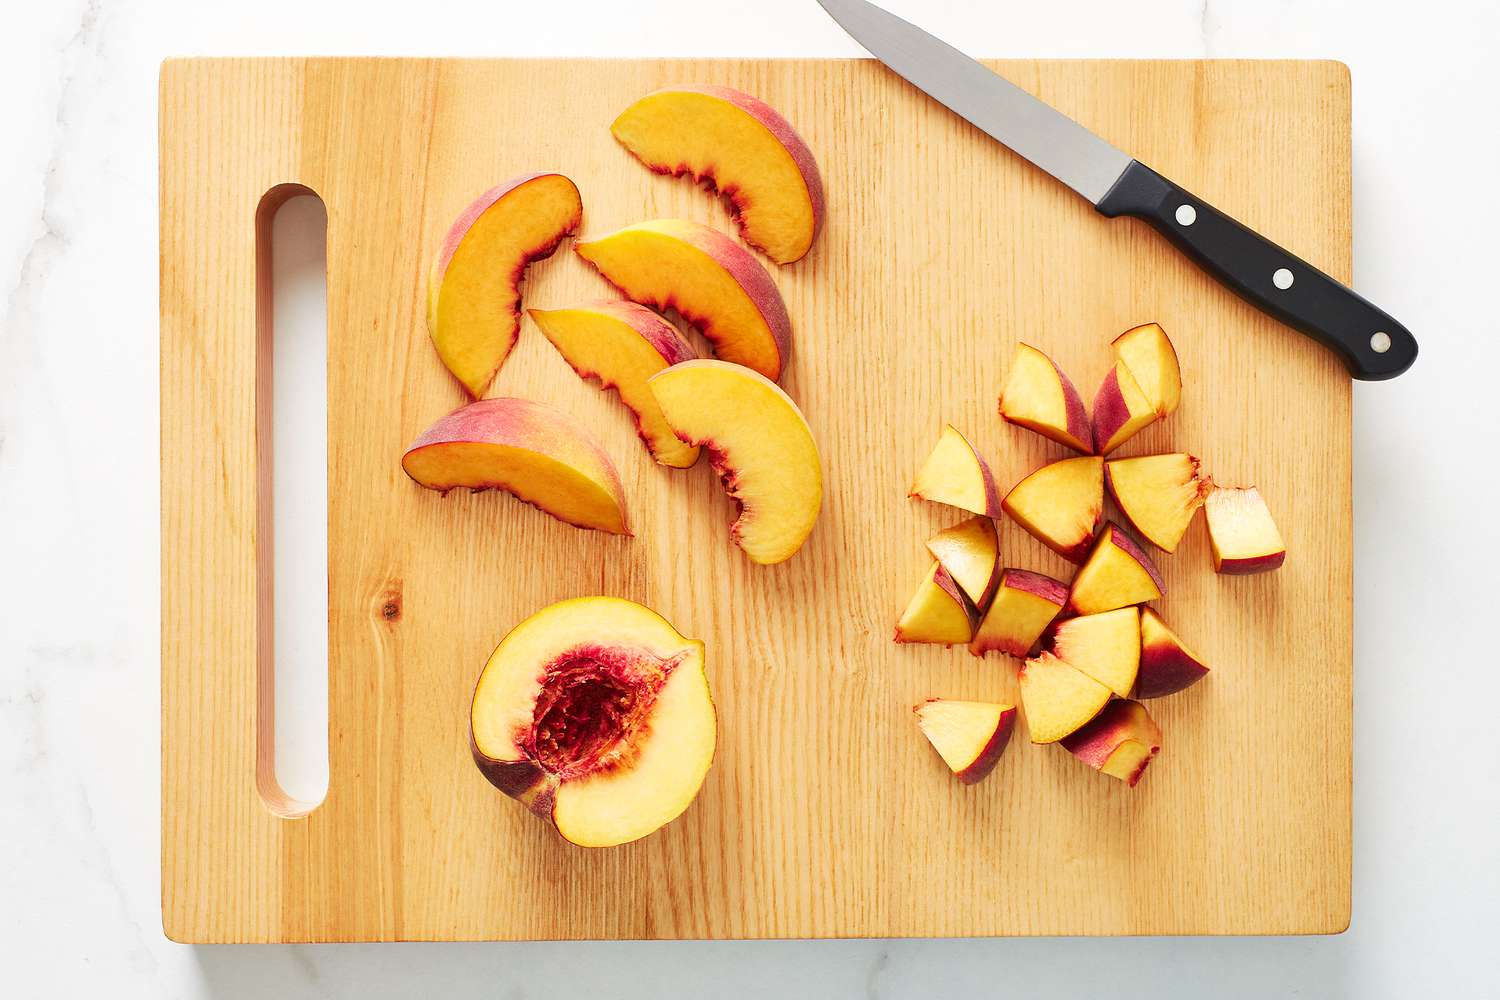 Peaches on a cutting board with a knife